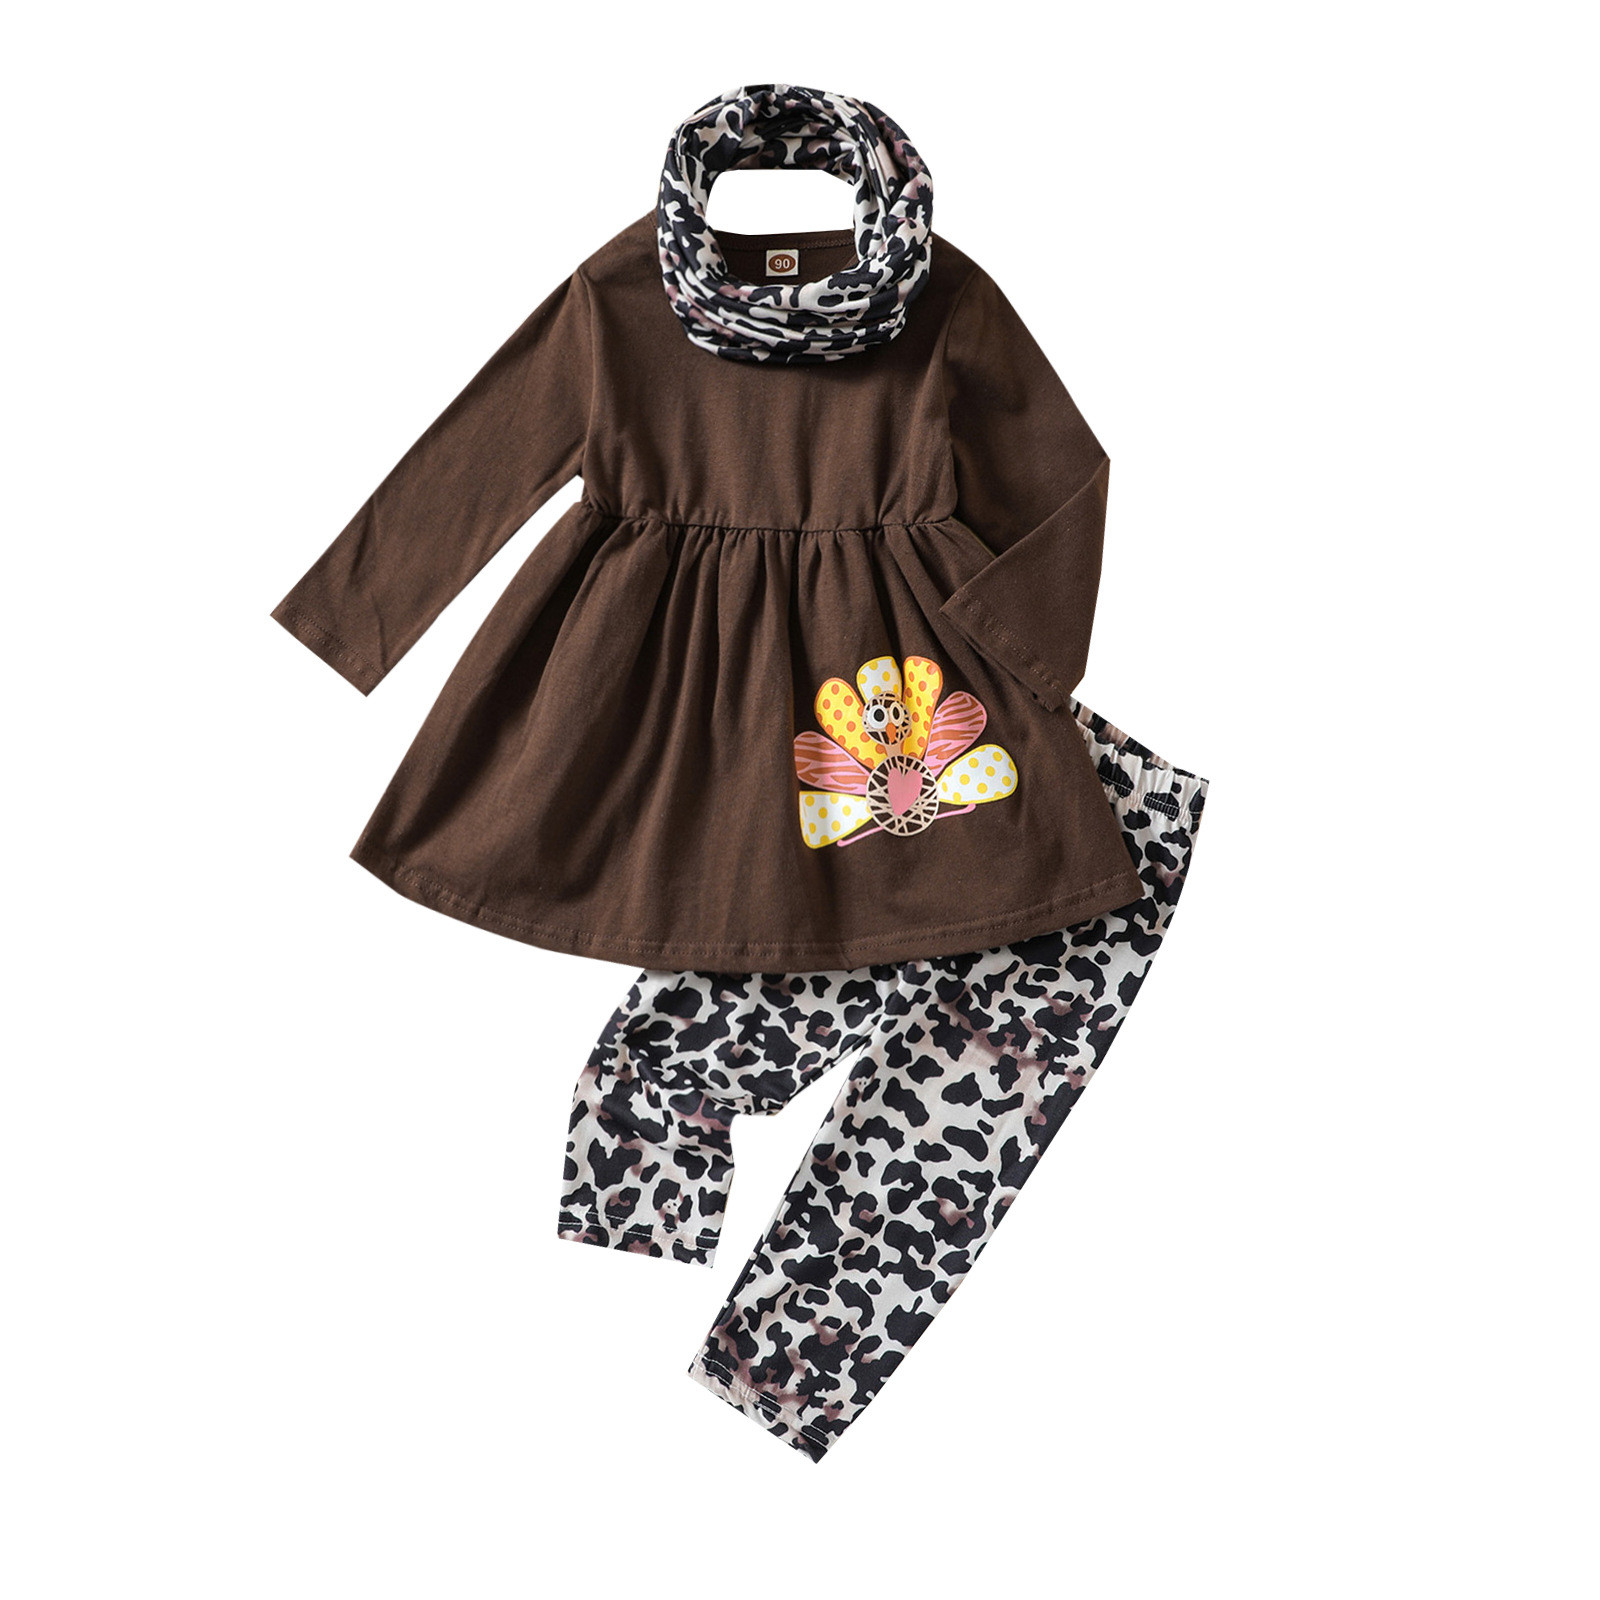 Long Sleeves Teen Girls Thanksgiving Kids Child Baby Girls Cute Cartoon Long Sleeve Dress Blouse Tops Leopard Print Pants Trousers With Headbands Clothes Set 3PCS Cute Outfit Kid Girl - image 1 of 9